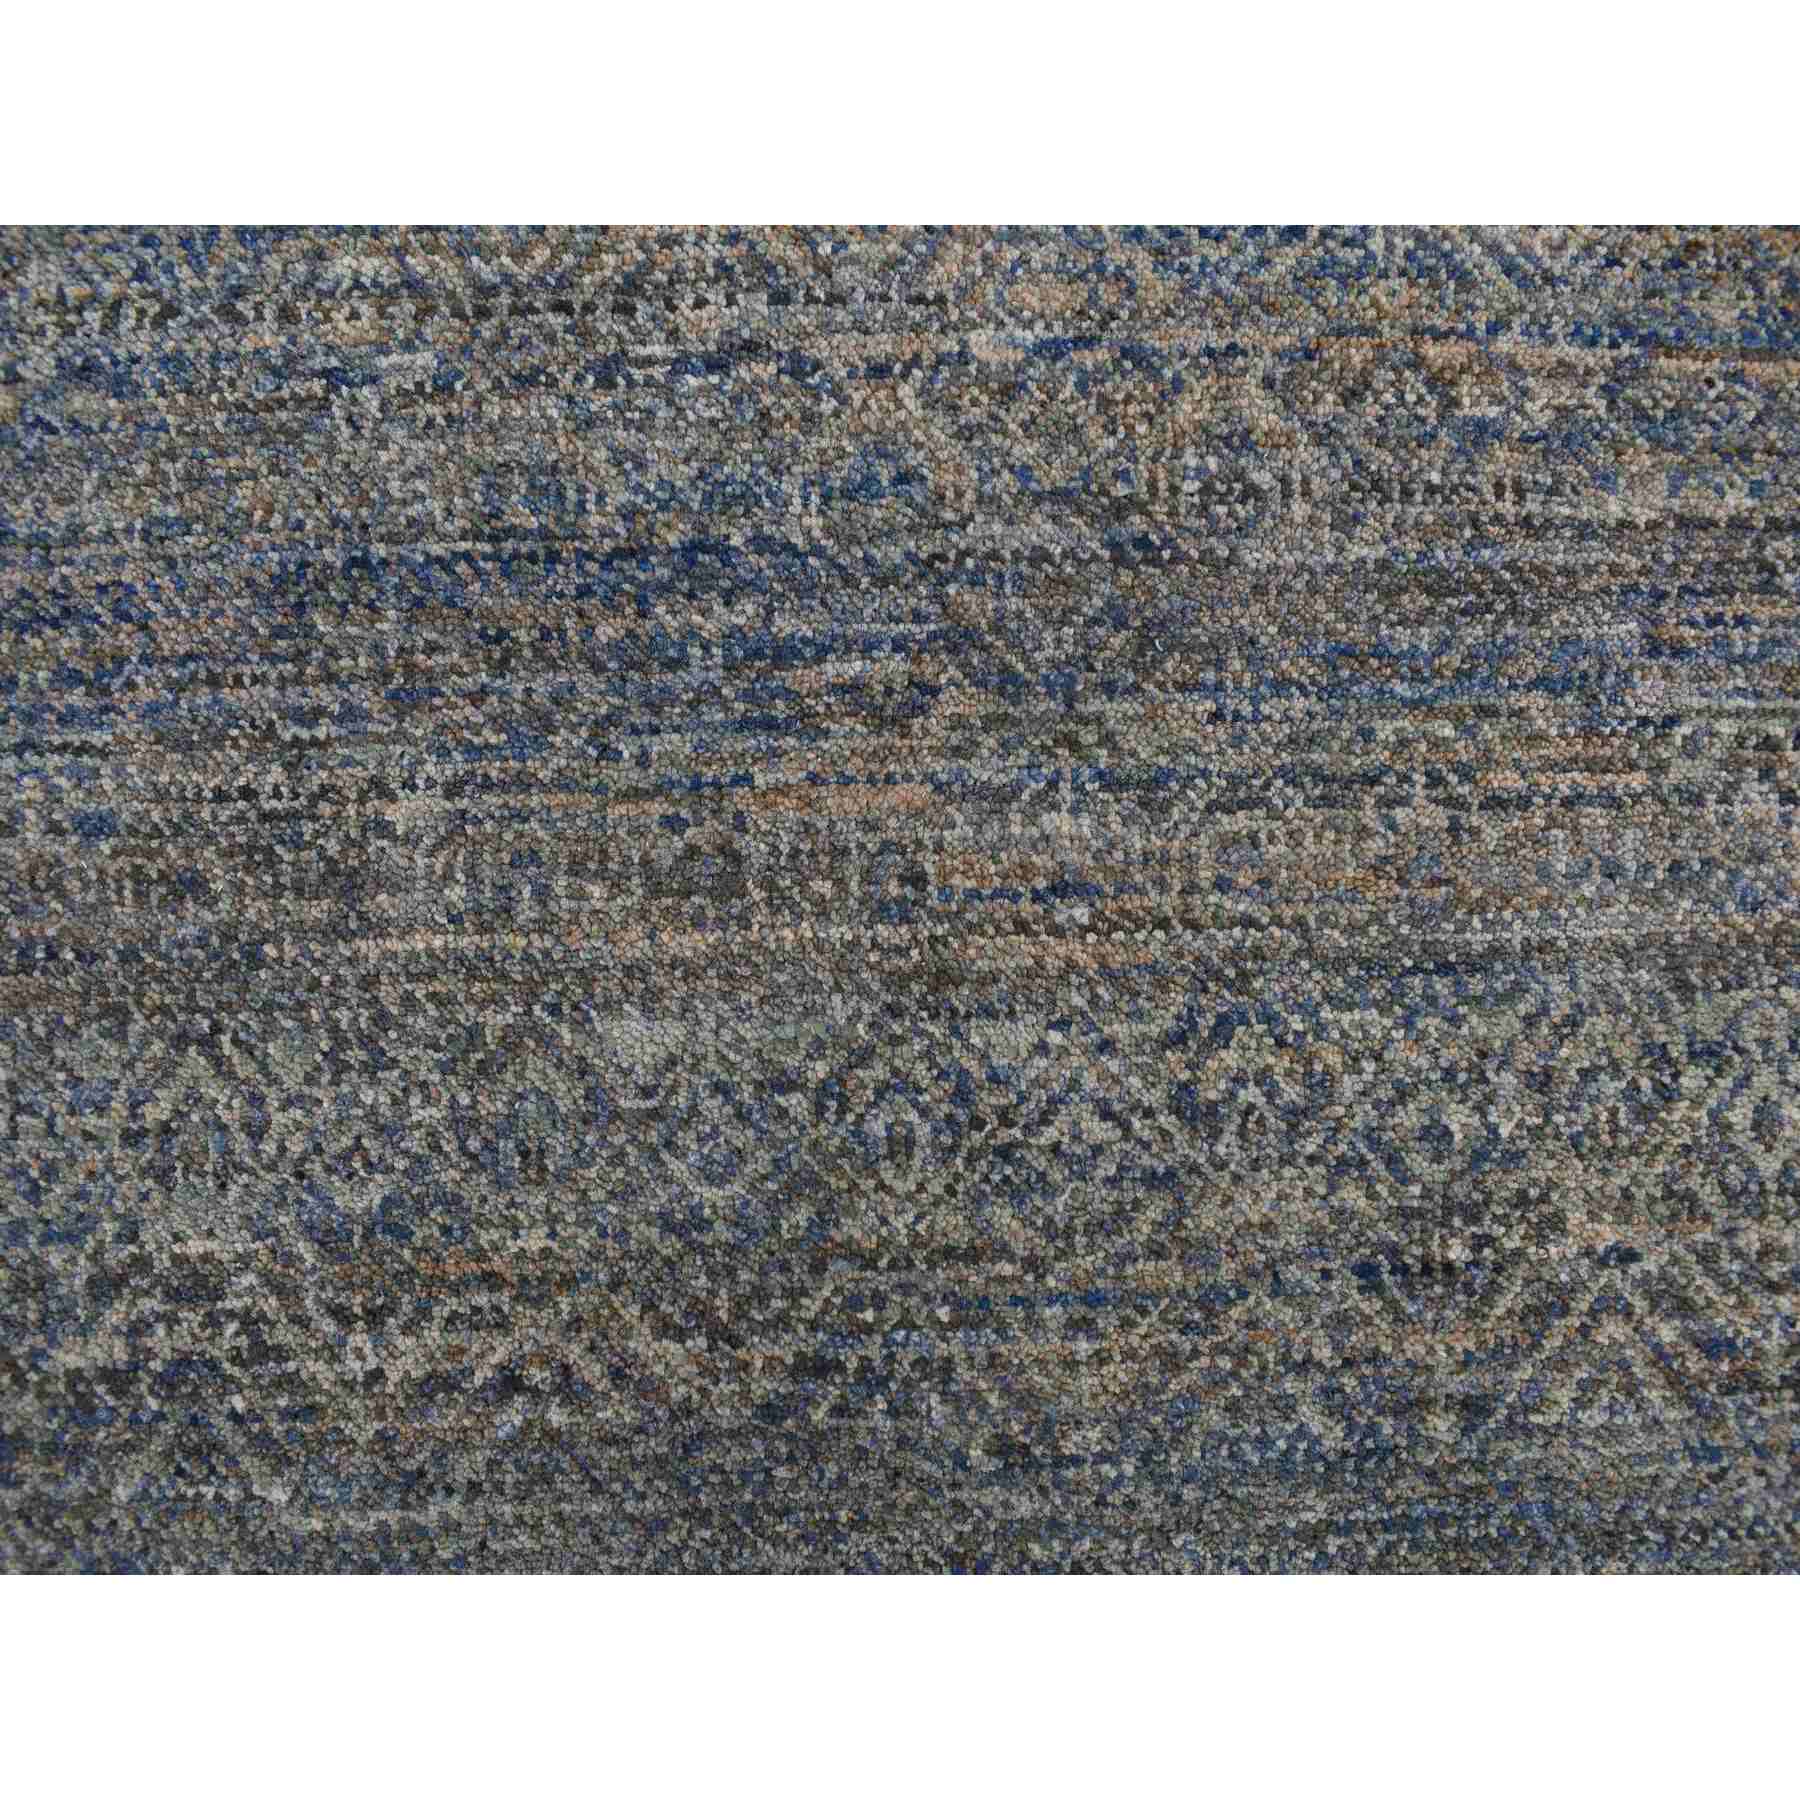 Modern-and-Contemporary-Hand-Knotted-Rug-390740